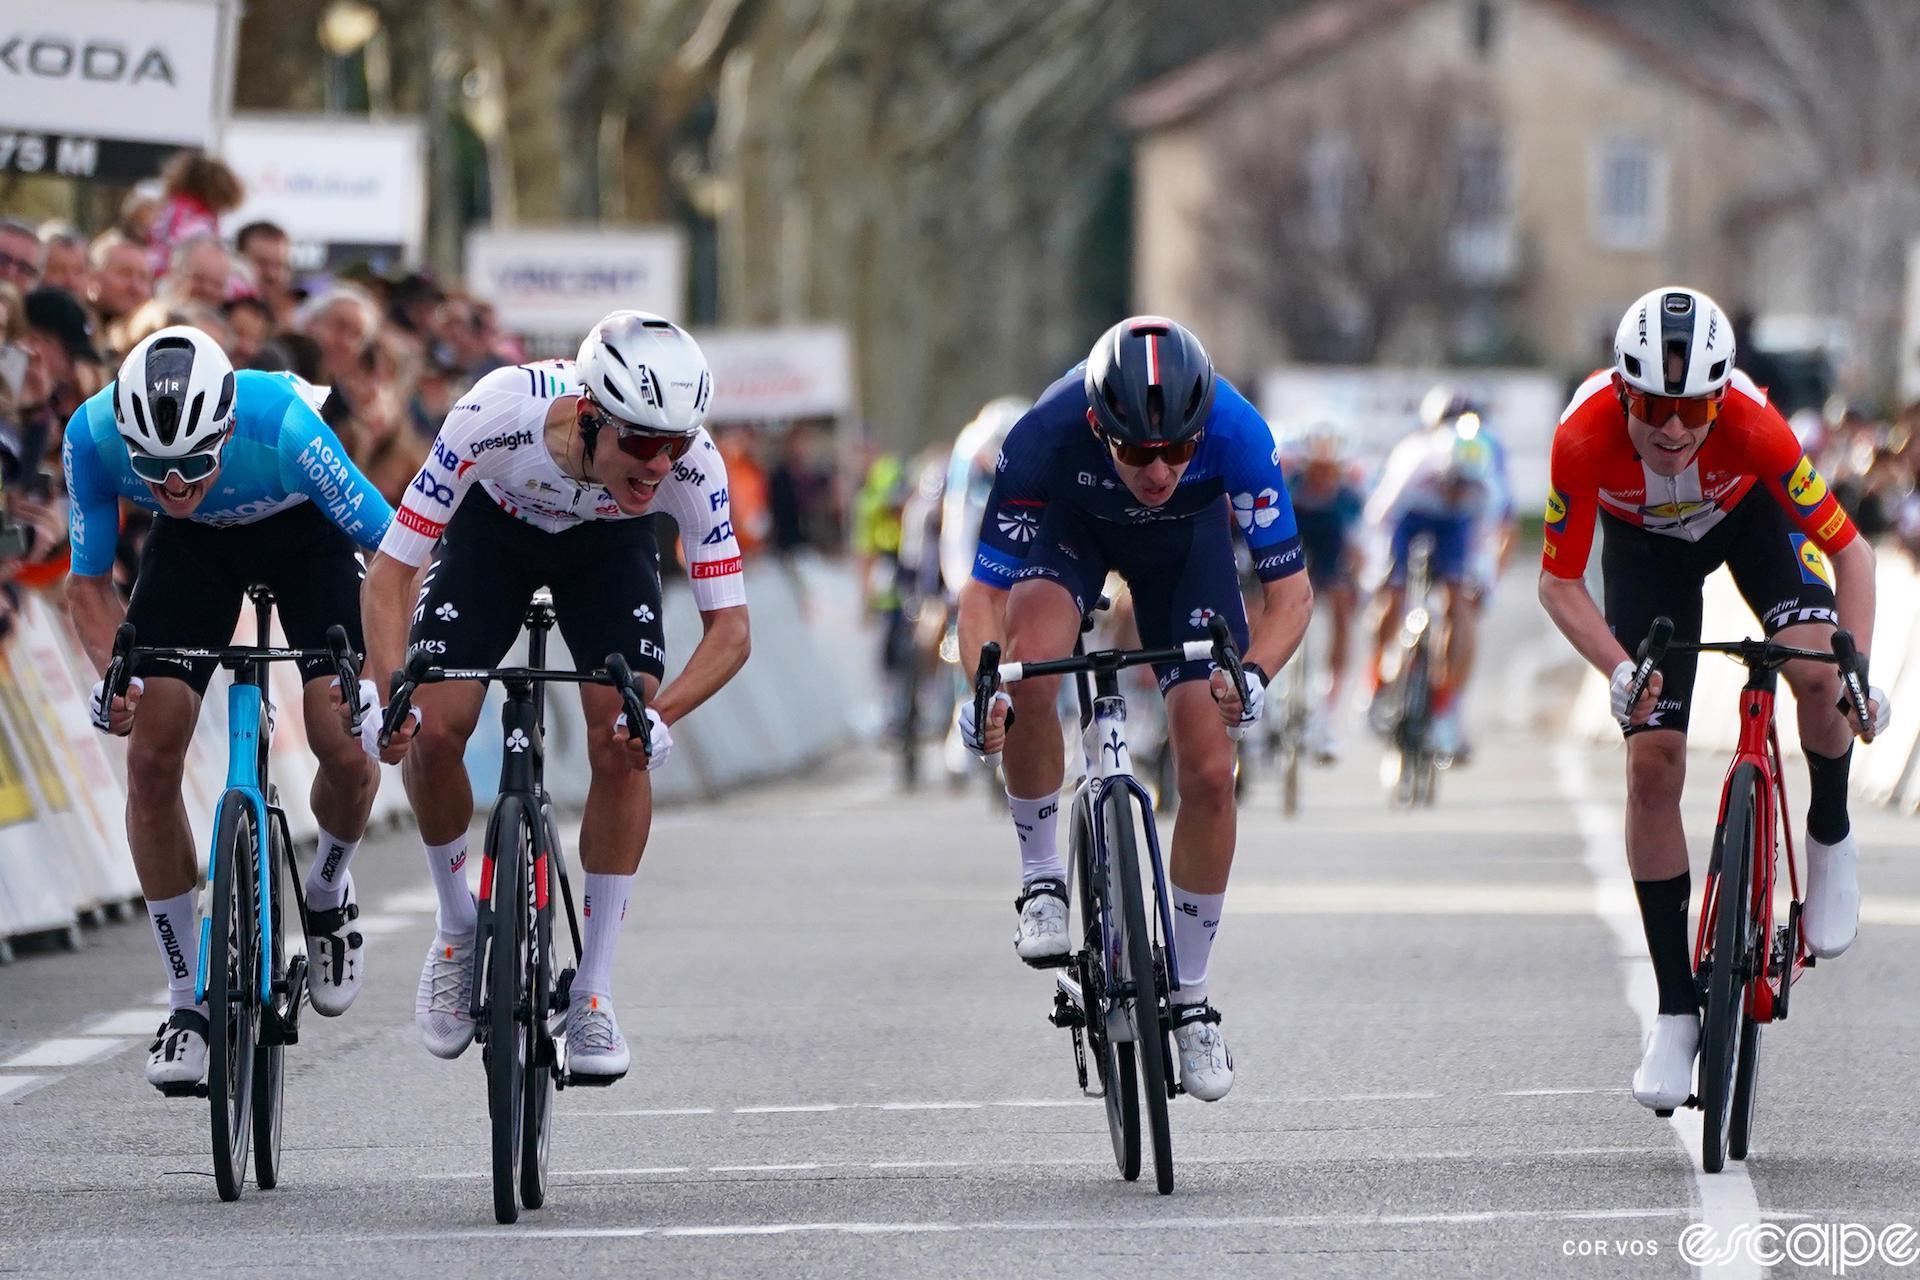 From left to right, Felix Gall, Juan Ayuso, Lenny Martinez, and Mattias Skjelmose sprint out the win at the 2024 Faun Ardeche. All four are out of the saddle and grimacing from the effort.